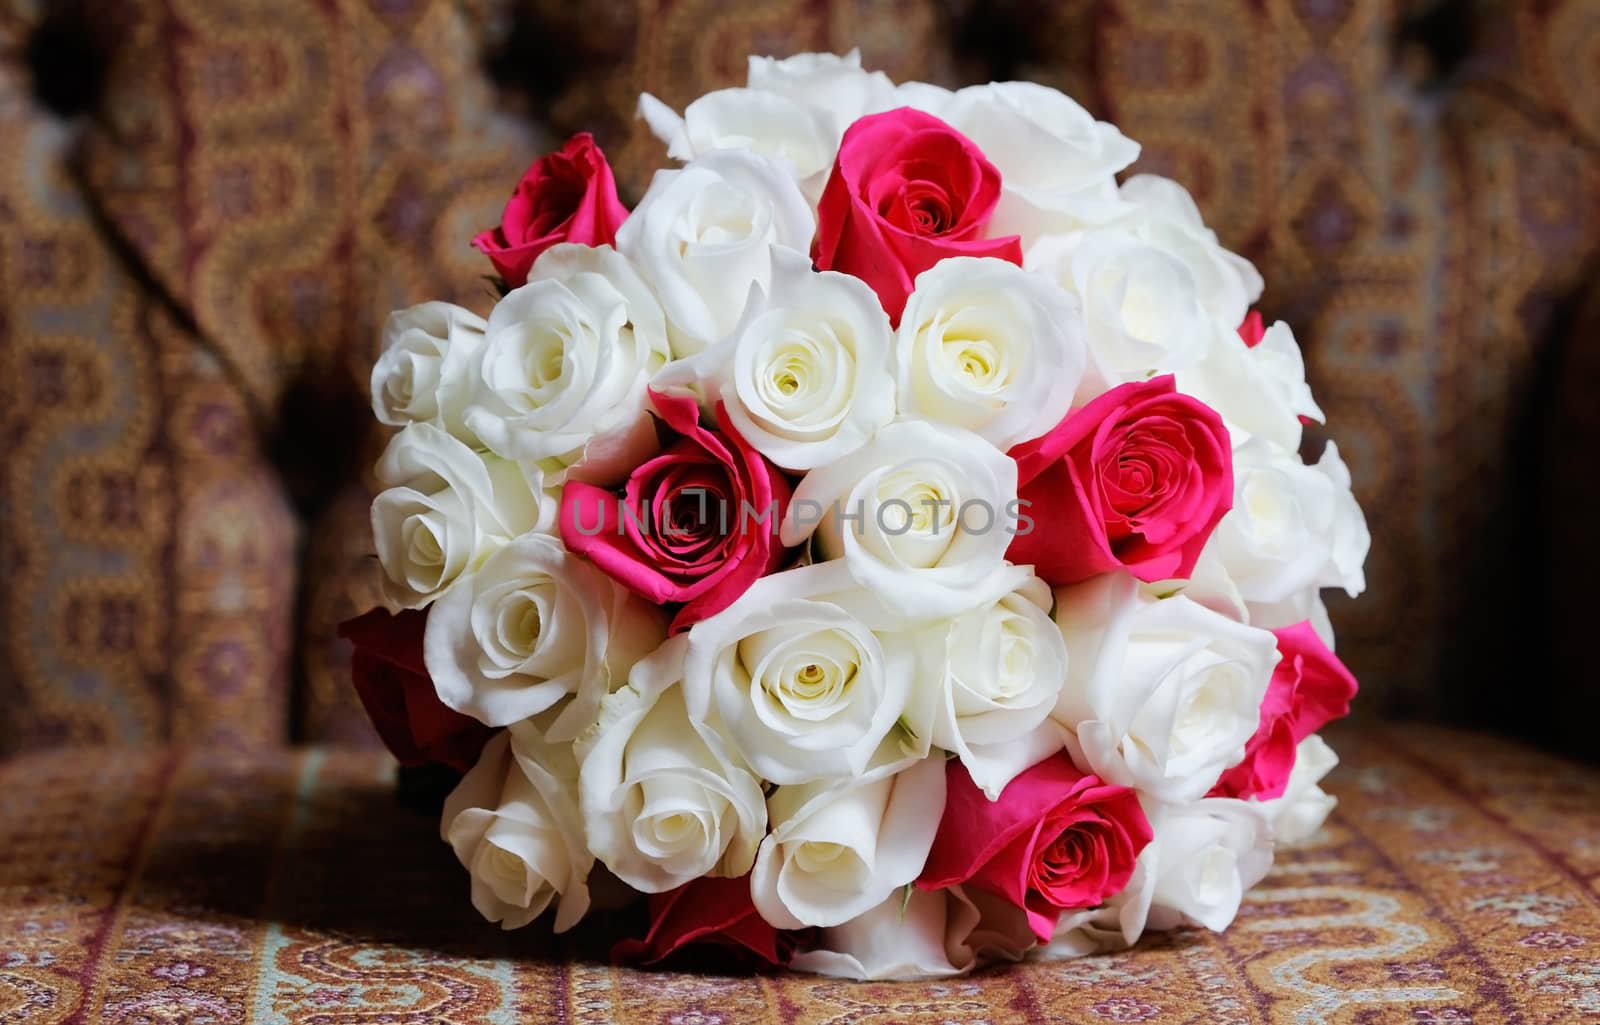 Brides red and white roses on wedding day in a floral arranagement showing closeup detail